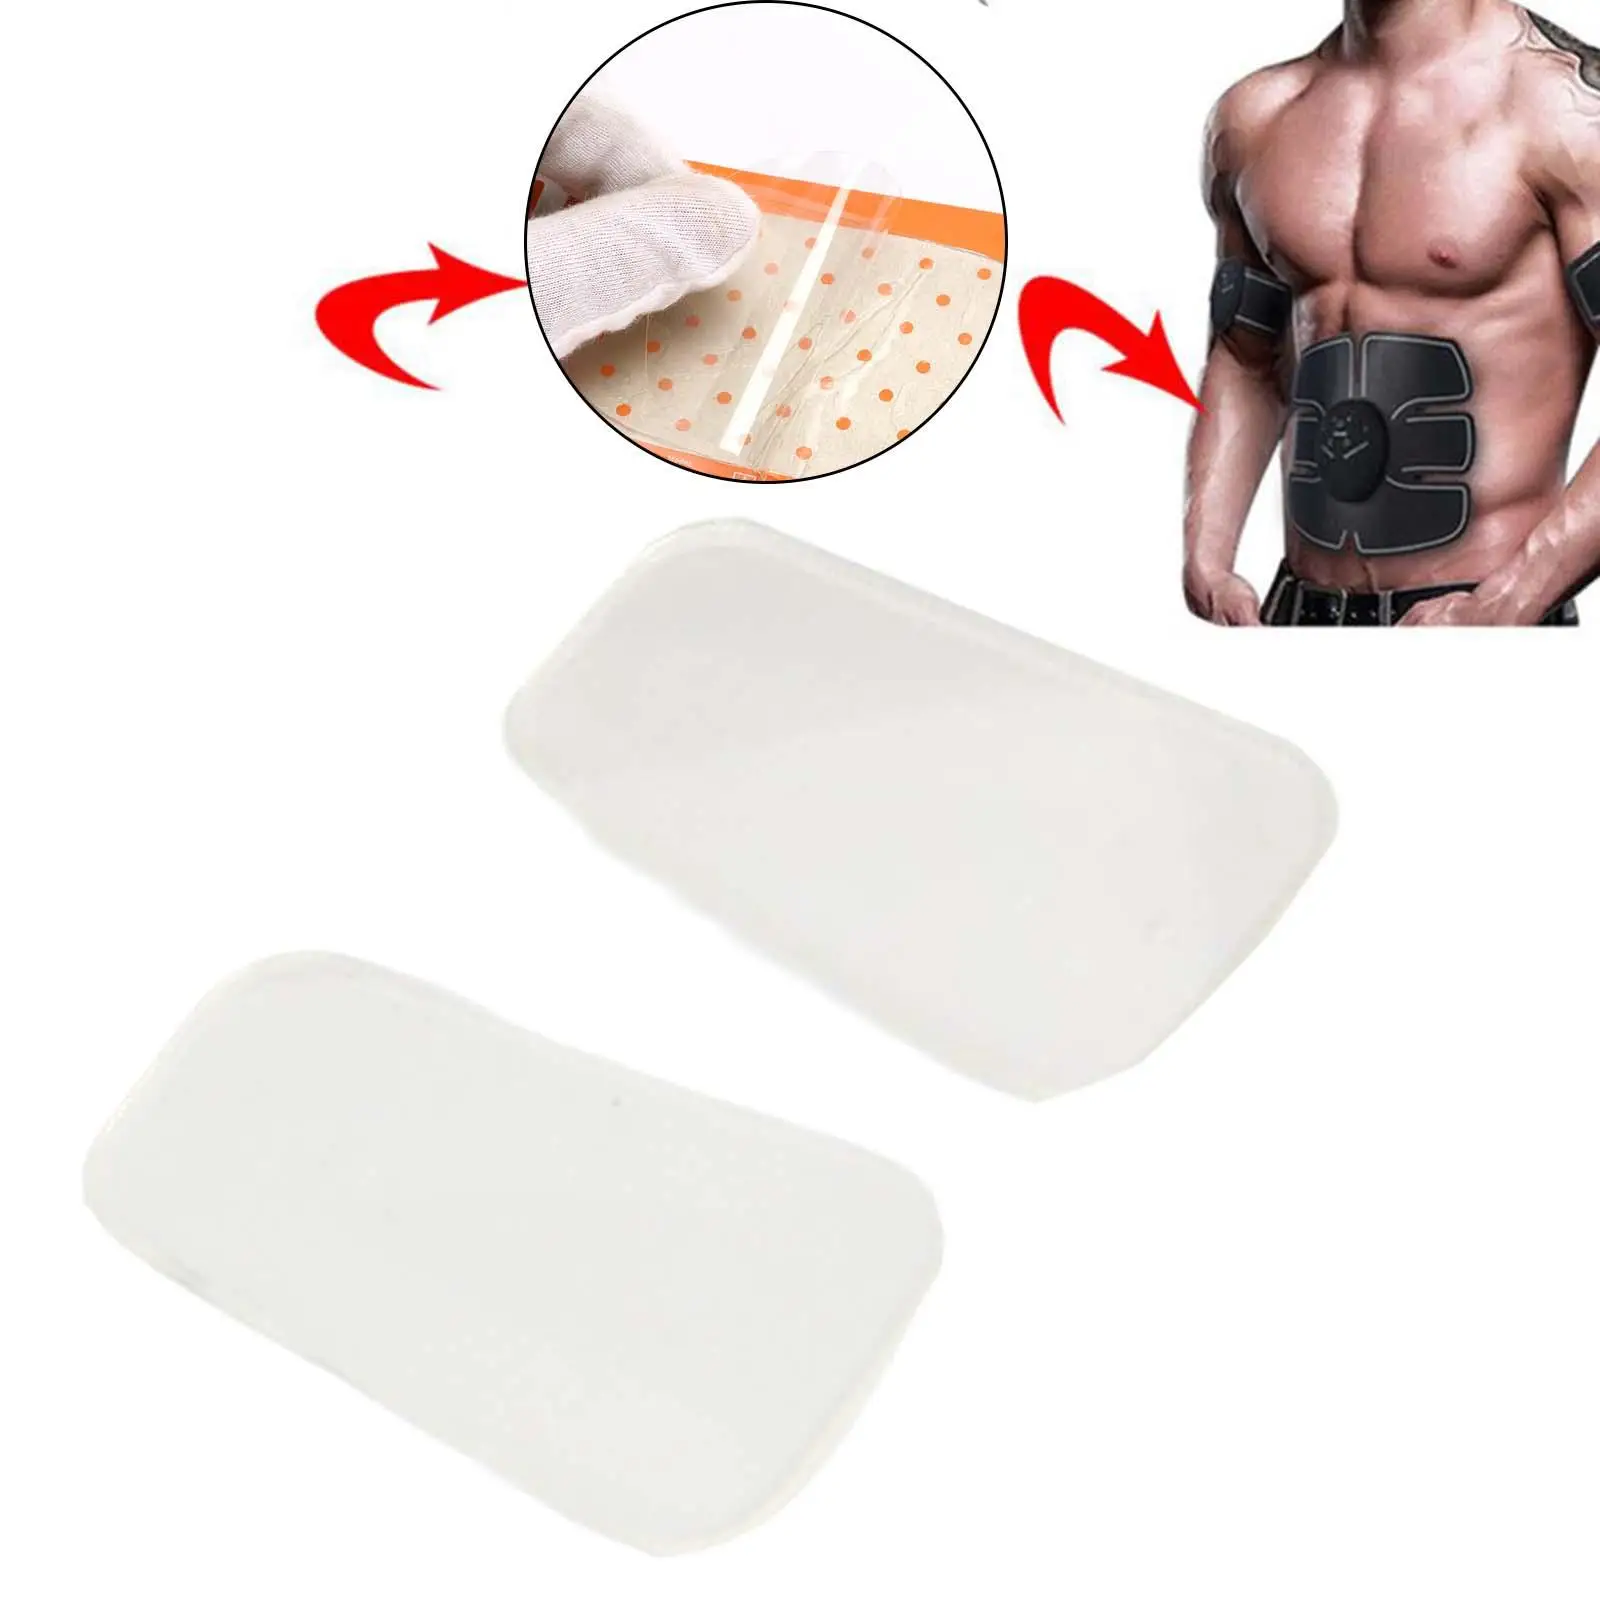 2Pcs Gel Sheet Replacement Reusable for Abdominal Trainer Workout Toning Belt Stimulator Training Accessory